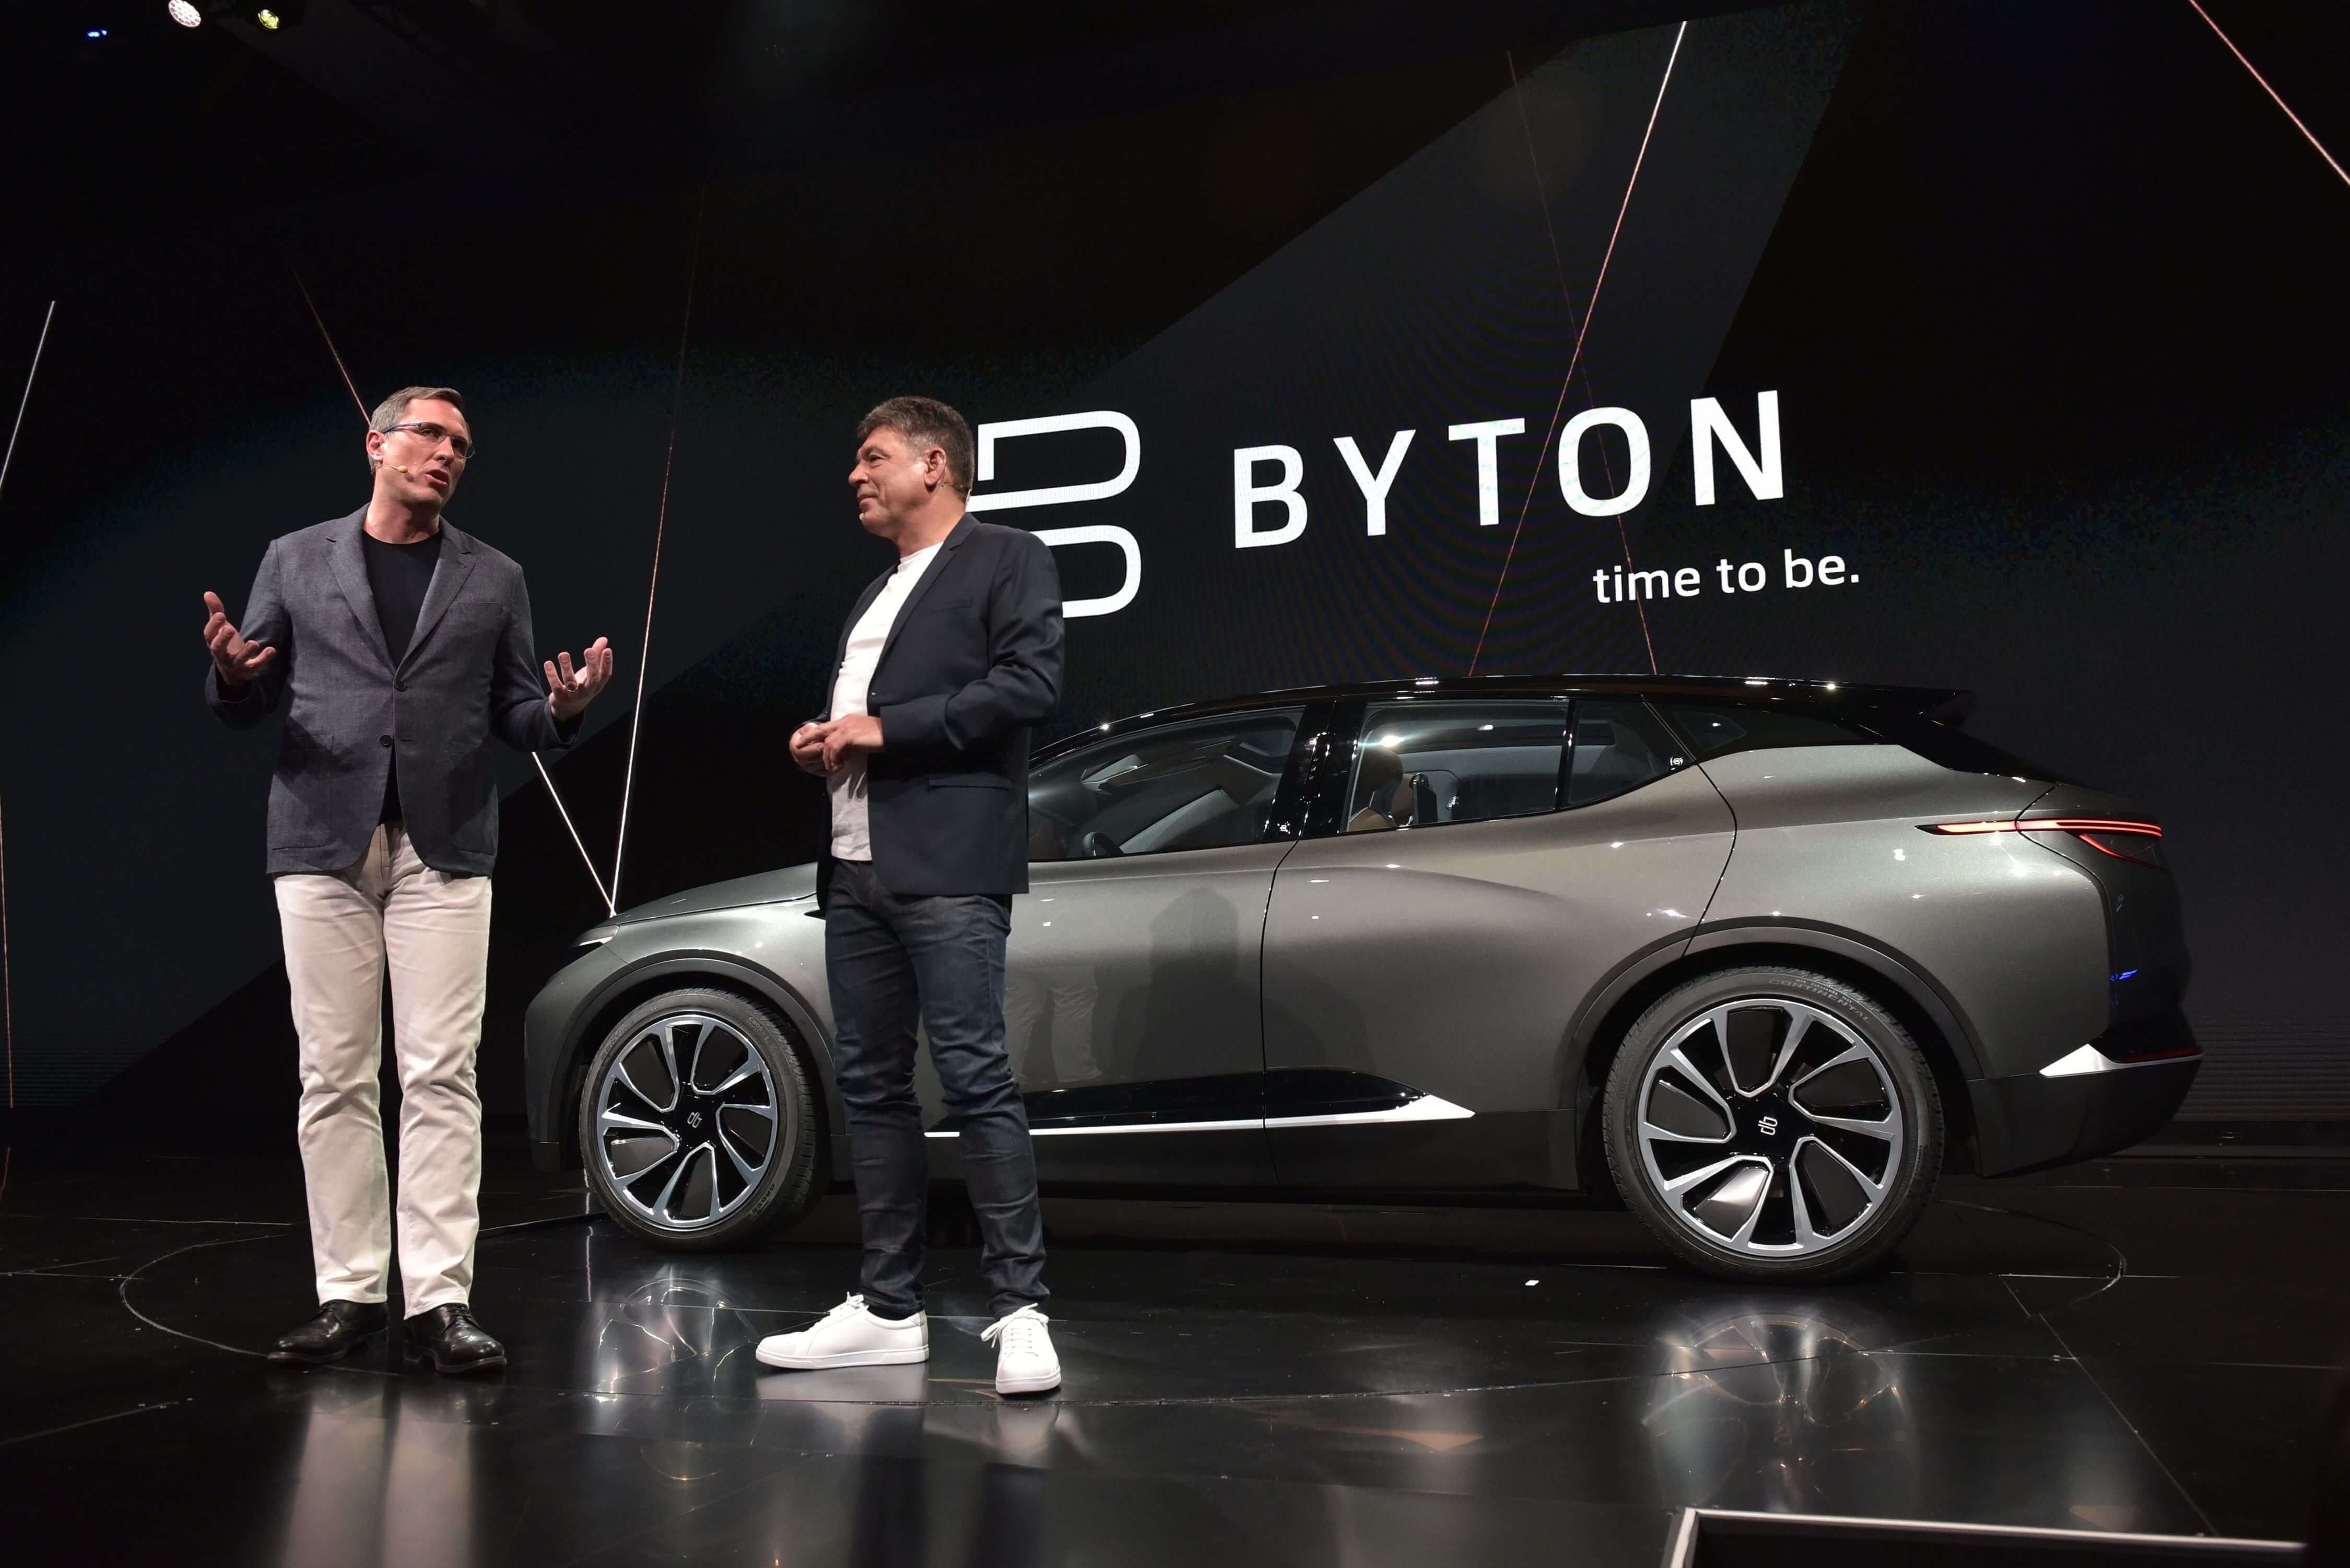 Byton executives speak during the launch of the Byton connected car during CES 2018